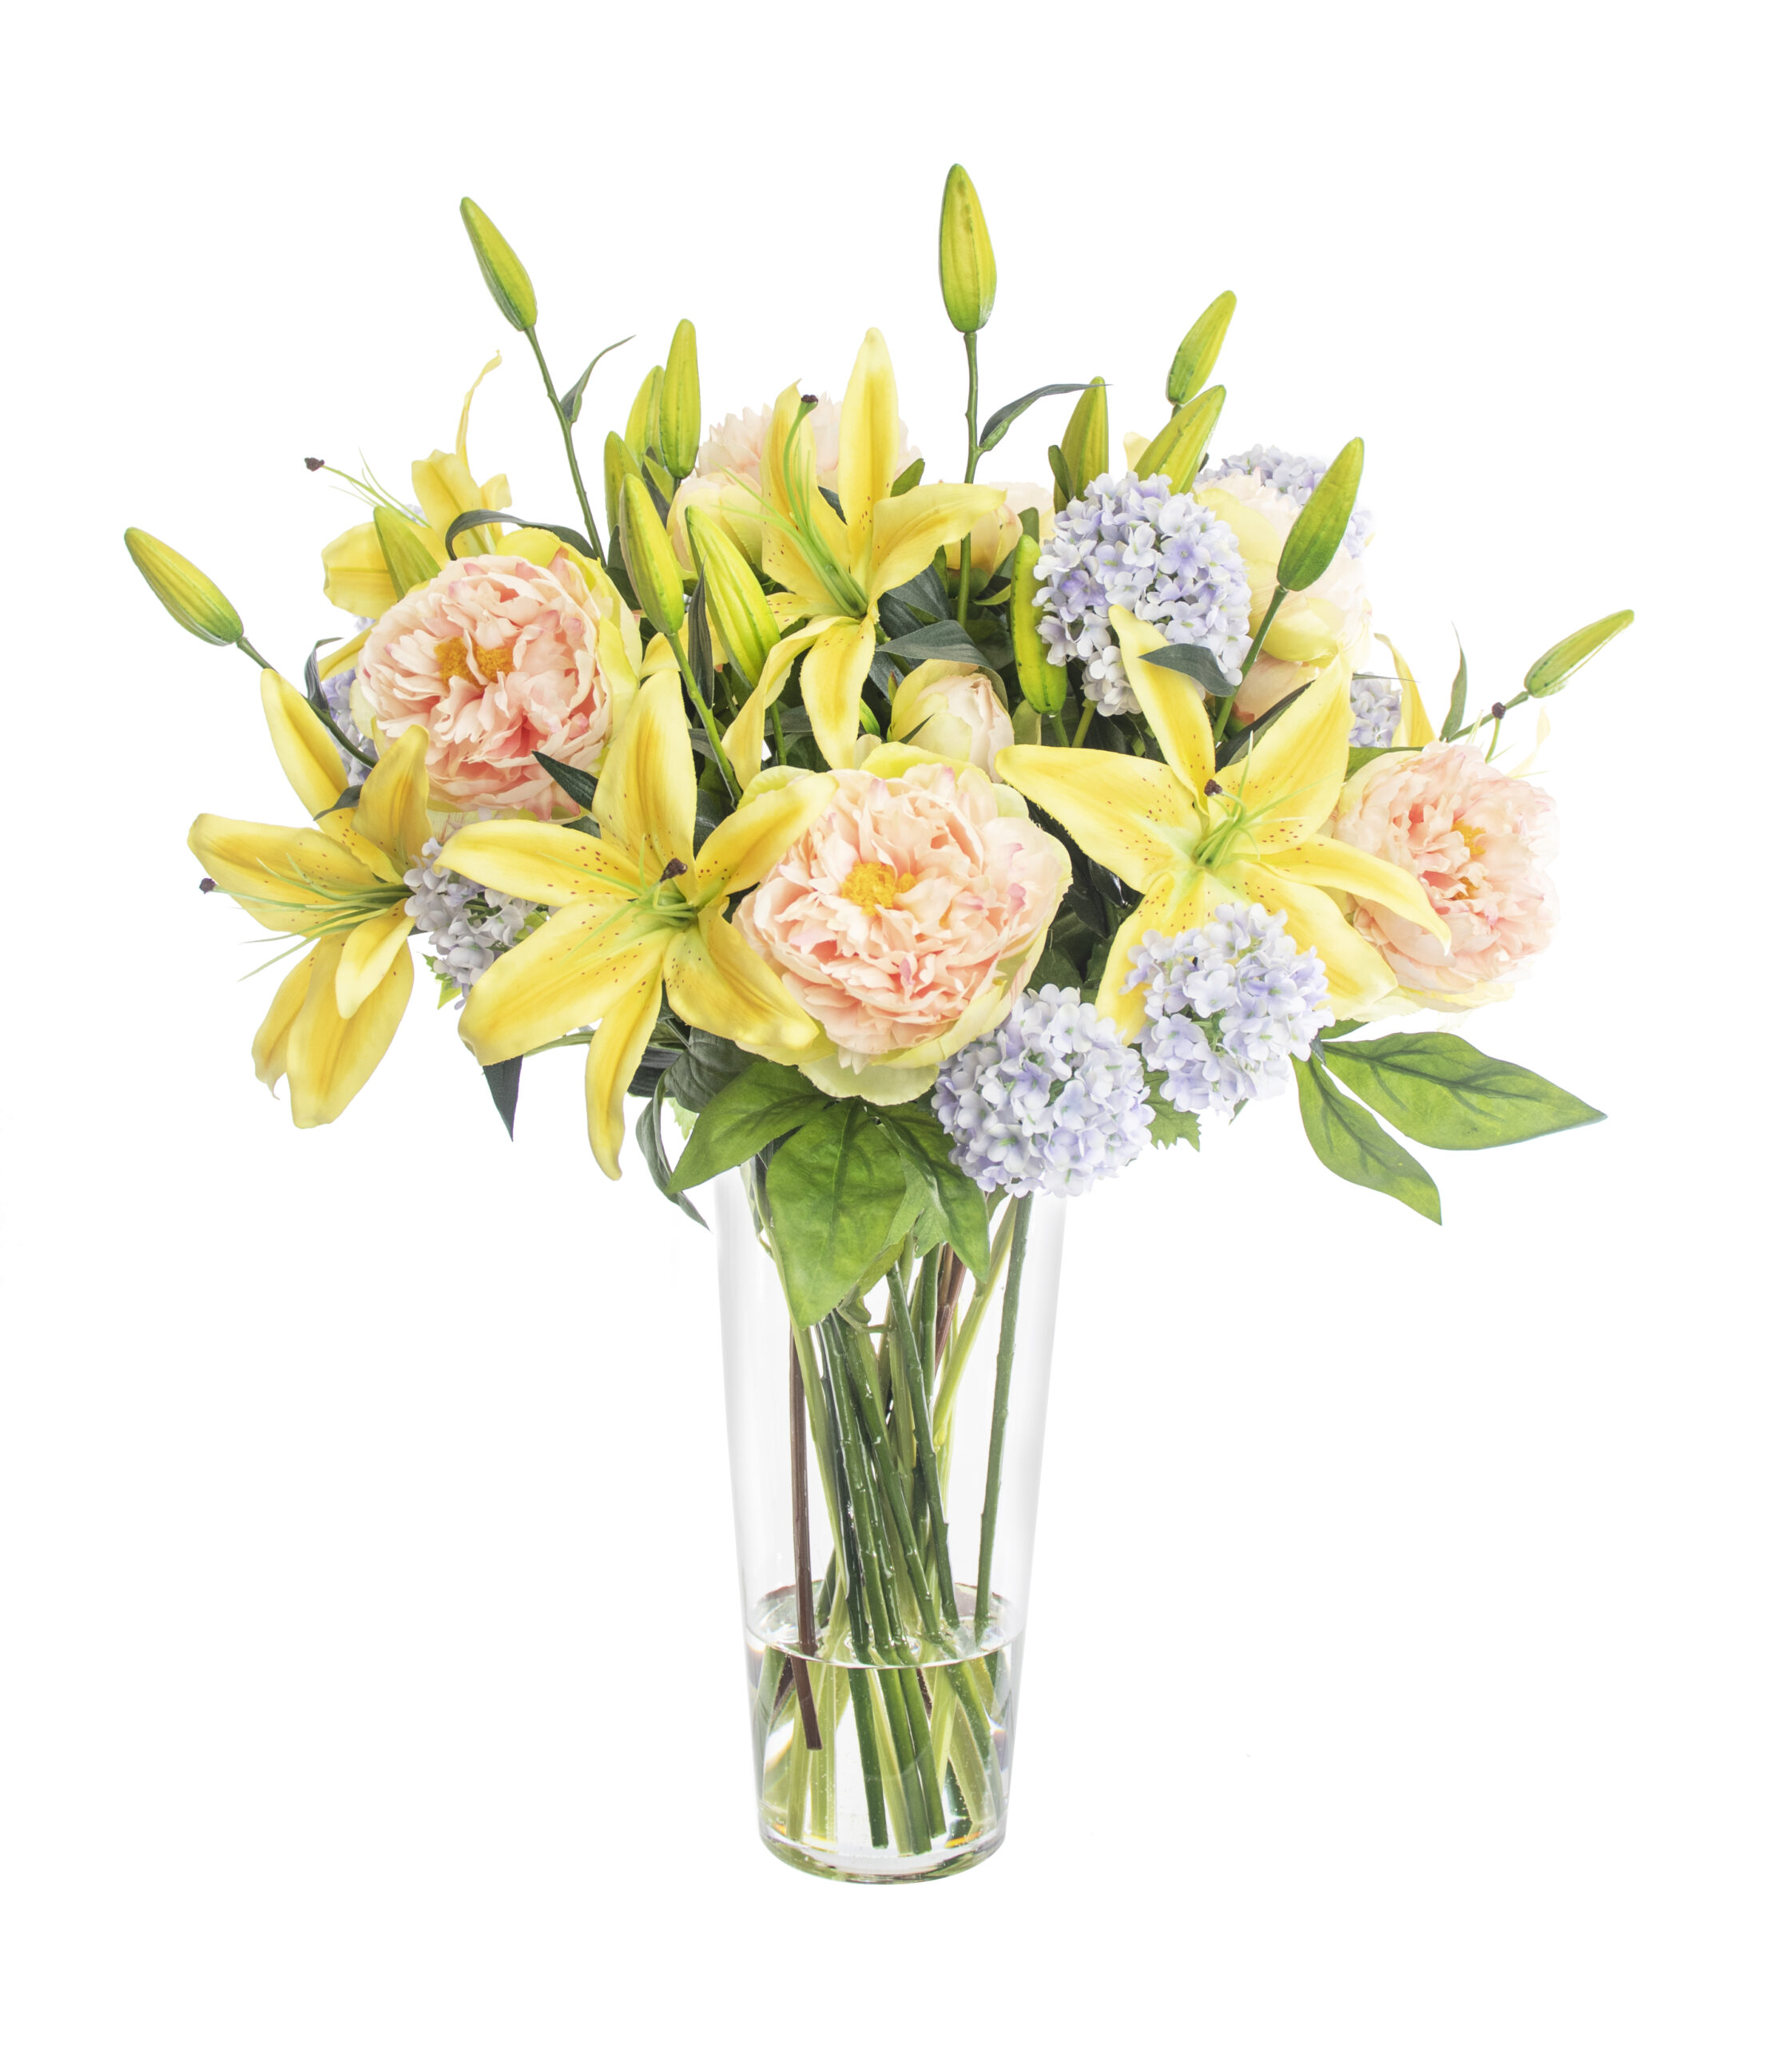 A mixed bunch consisting of pink peonies, yellow lillies and blue hydrangeas.